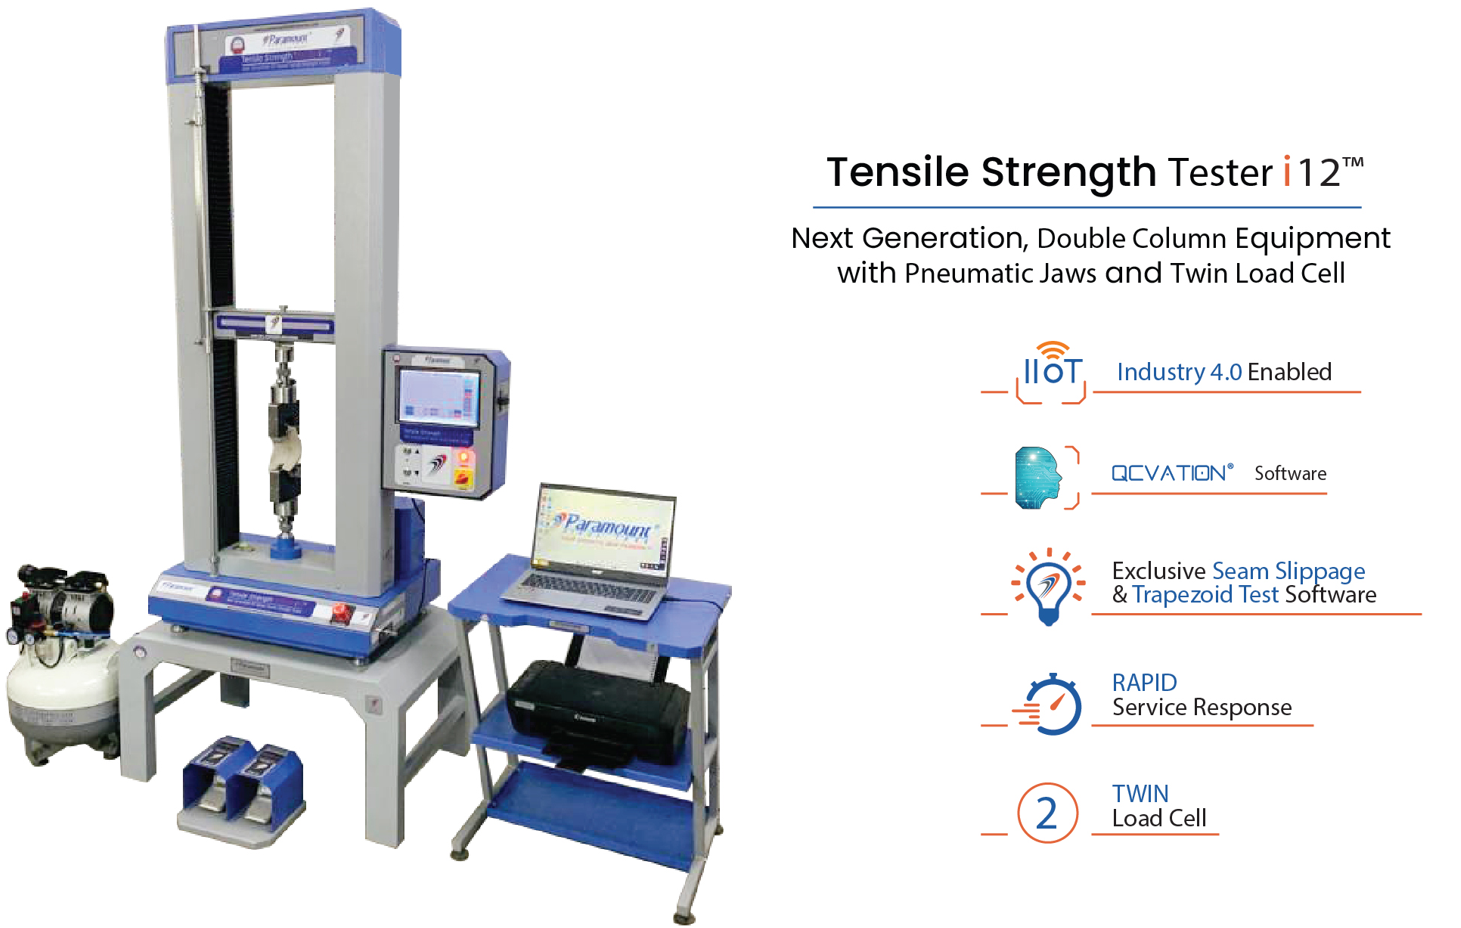 Tensile Strength Testeri12™

 

Next Generation, Double Column Equipment
with Pneumatic Jaws and Twin Load Cell

0))

0

E
SG

NN ”
- ~

ul

?
®

Industry 4.0 Enabled

QCVATION® Software

Exclusive Seam slippage
& Trapezoid Test Software

RAPID
Service Response

TWIN

Load Cell